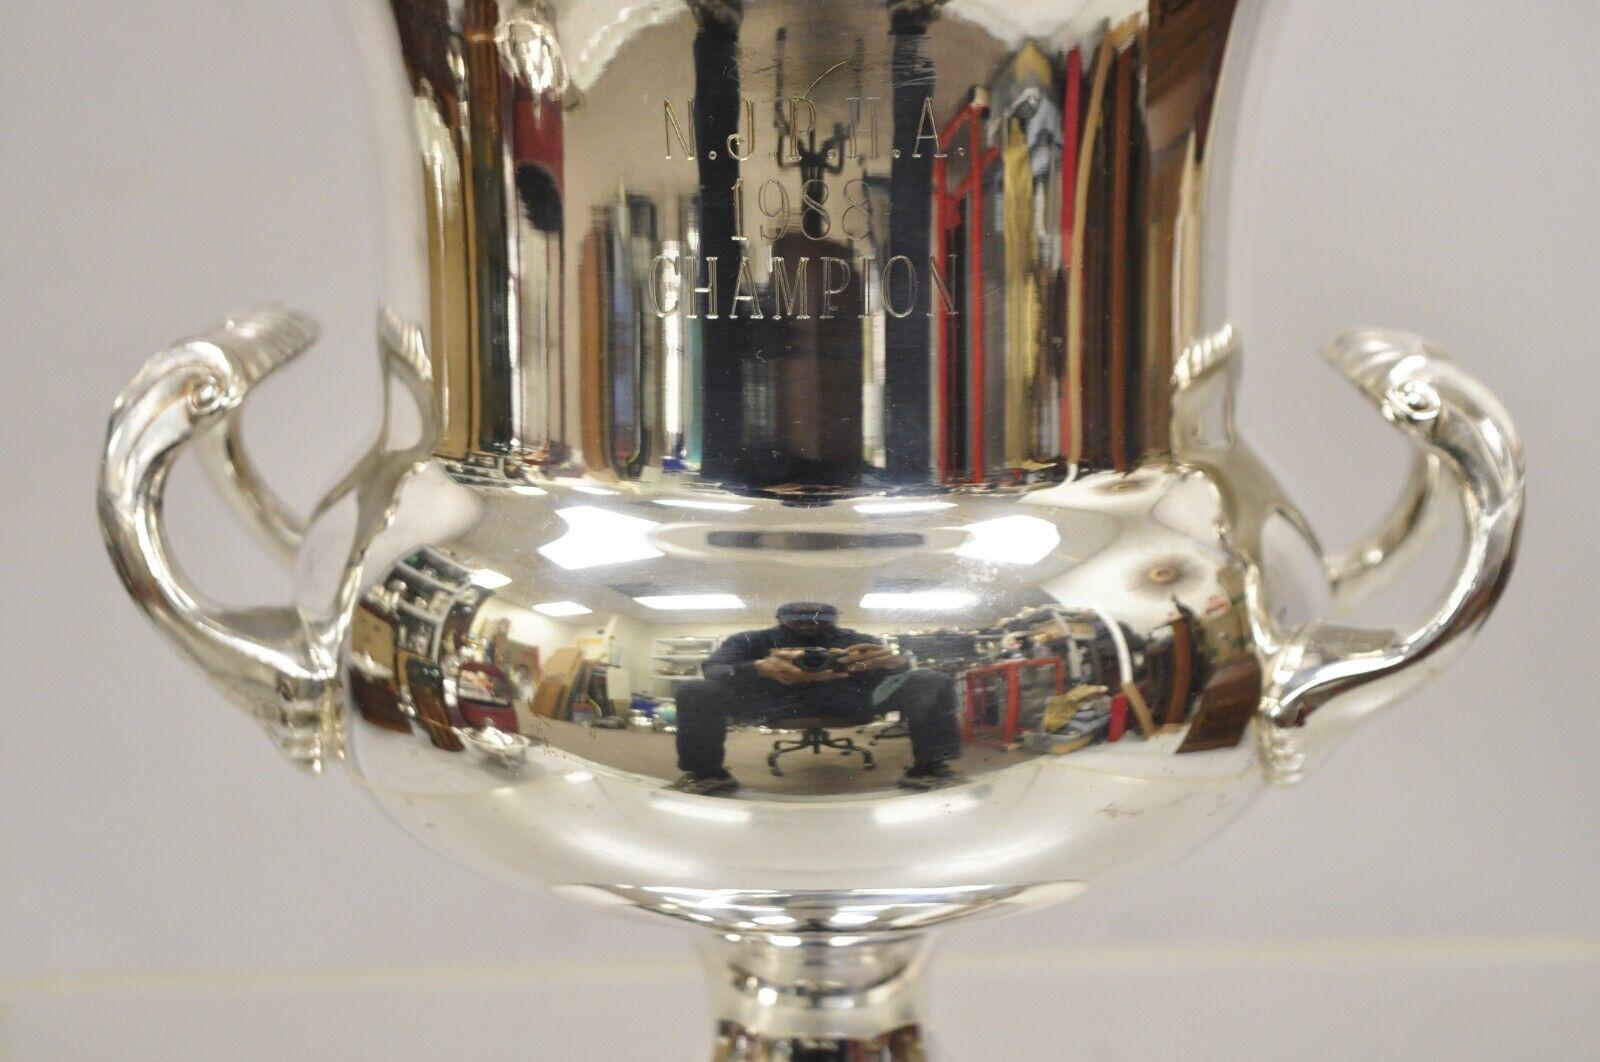 Victorian Towle Silver Plated Champagne Chiller Ice Bucket Trophy Cup NJPHA 1988 Champion For Sale